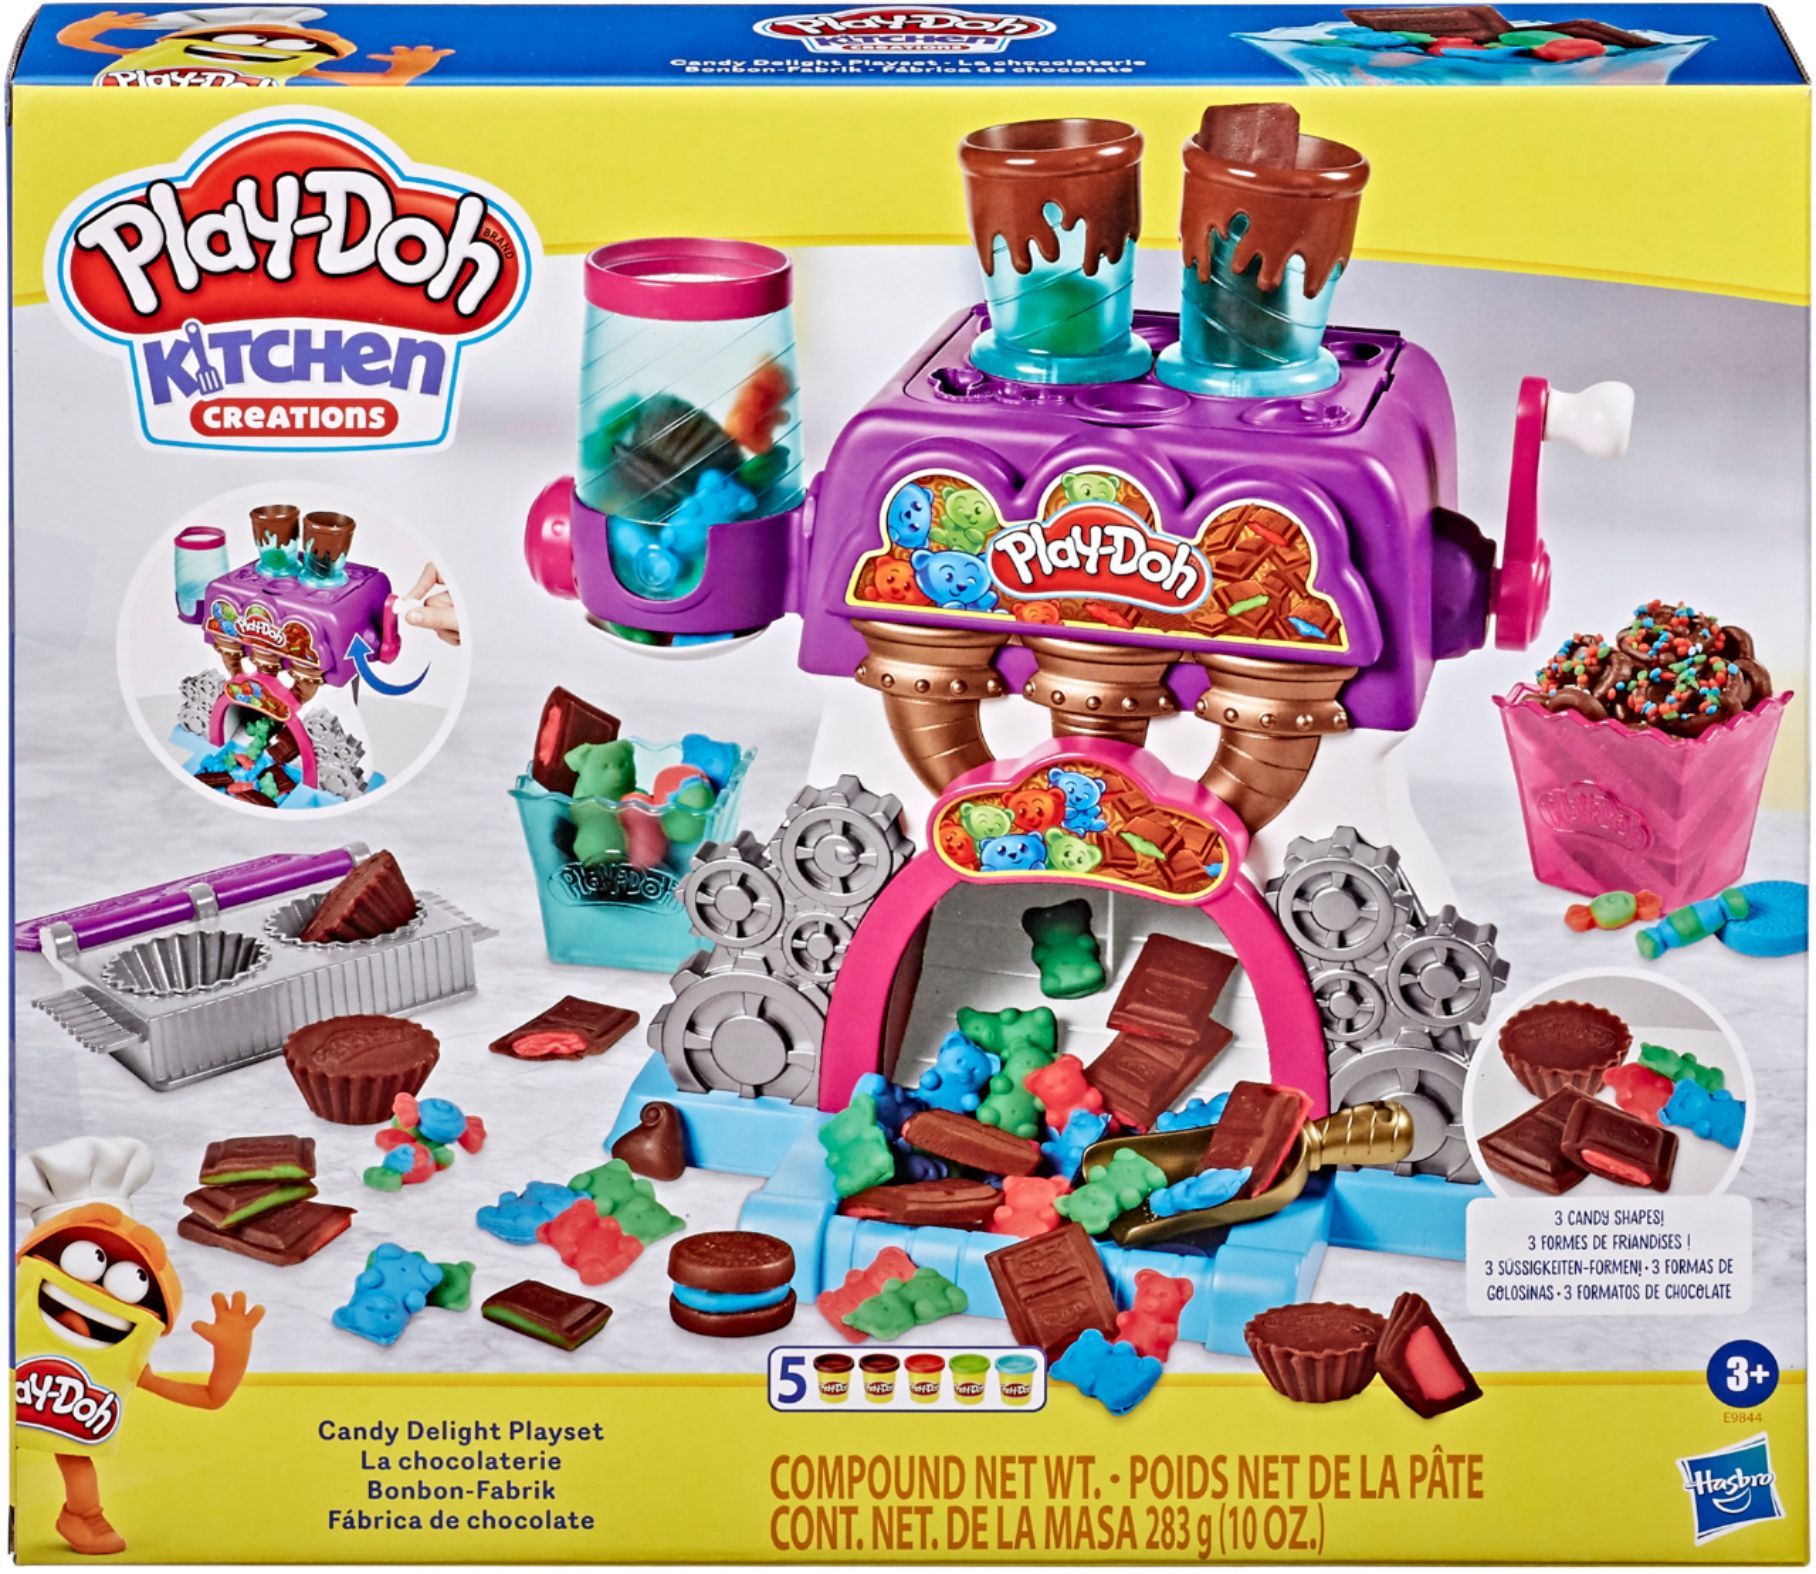 Best Buy: Play-Doh Kitchen Creations Candy Delight Playset E9844